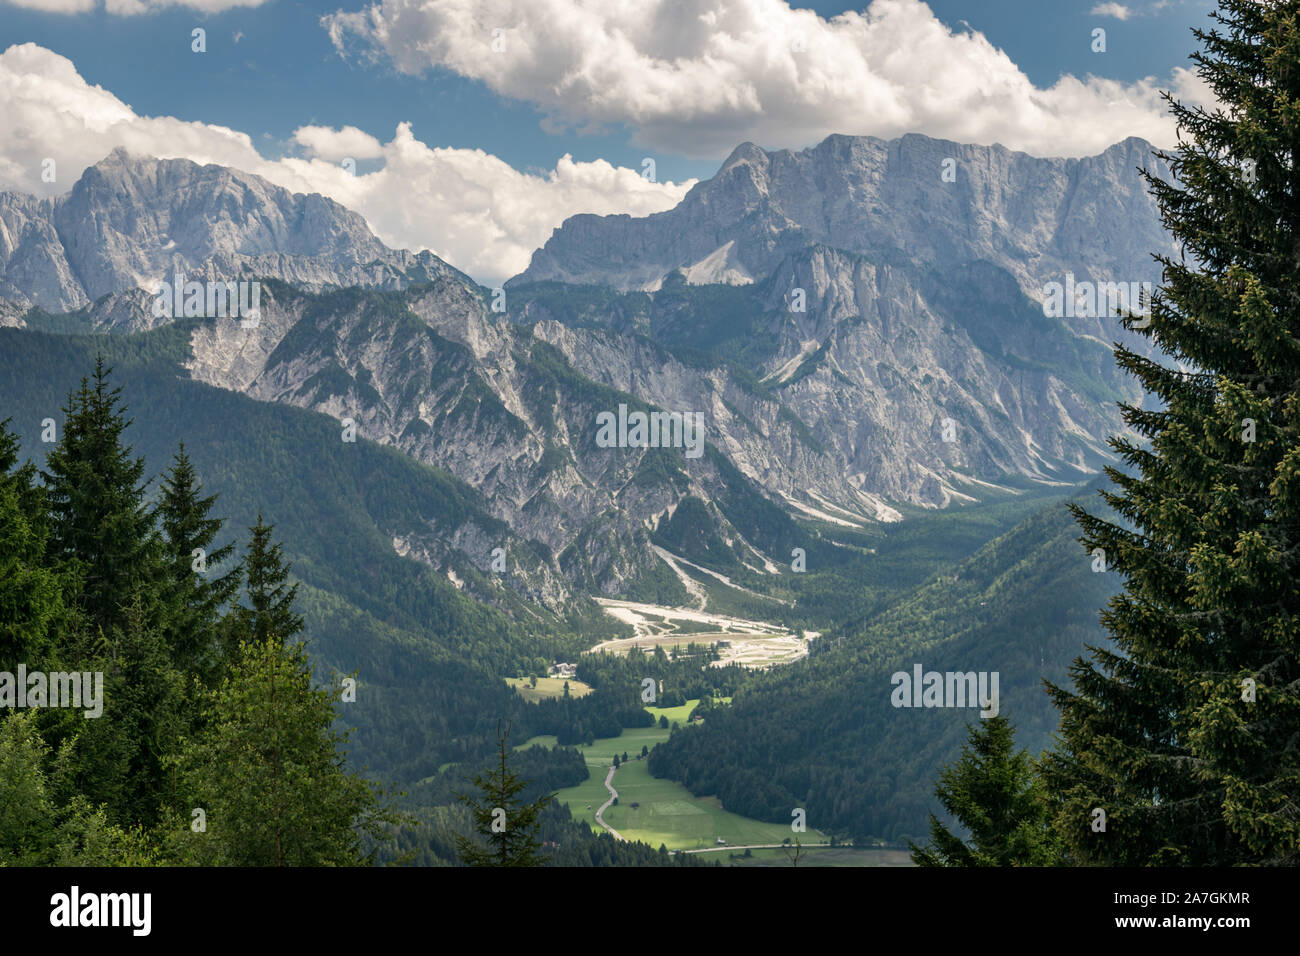 View of Triglav Mountain in the Julian Alps, Slovenia as seen from Tromeja: the triple point of Austria, Italy and Slovenia. Stock Photo